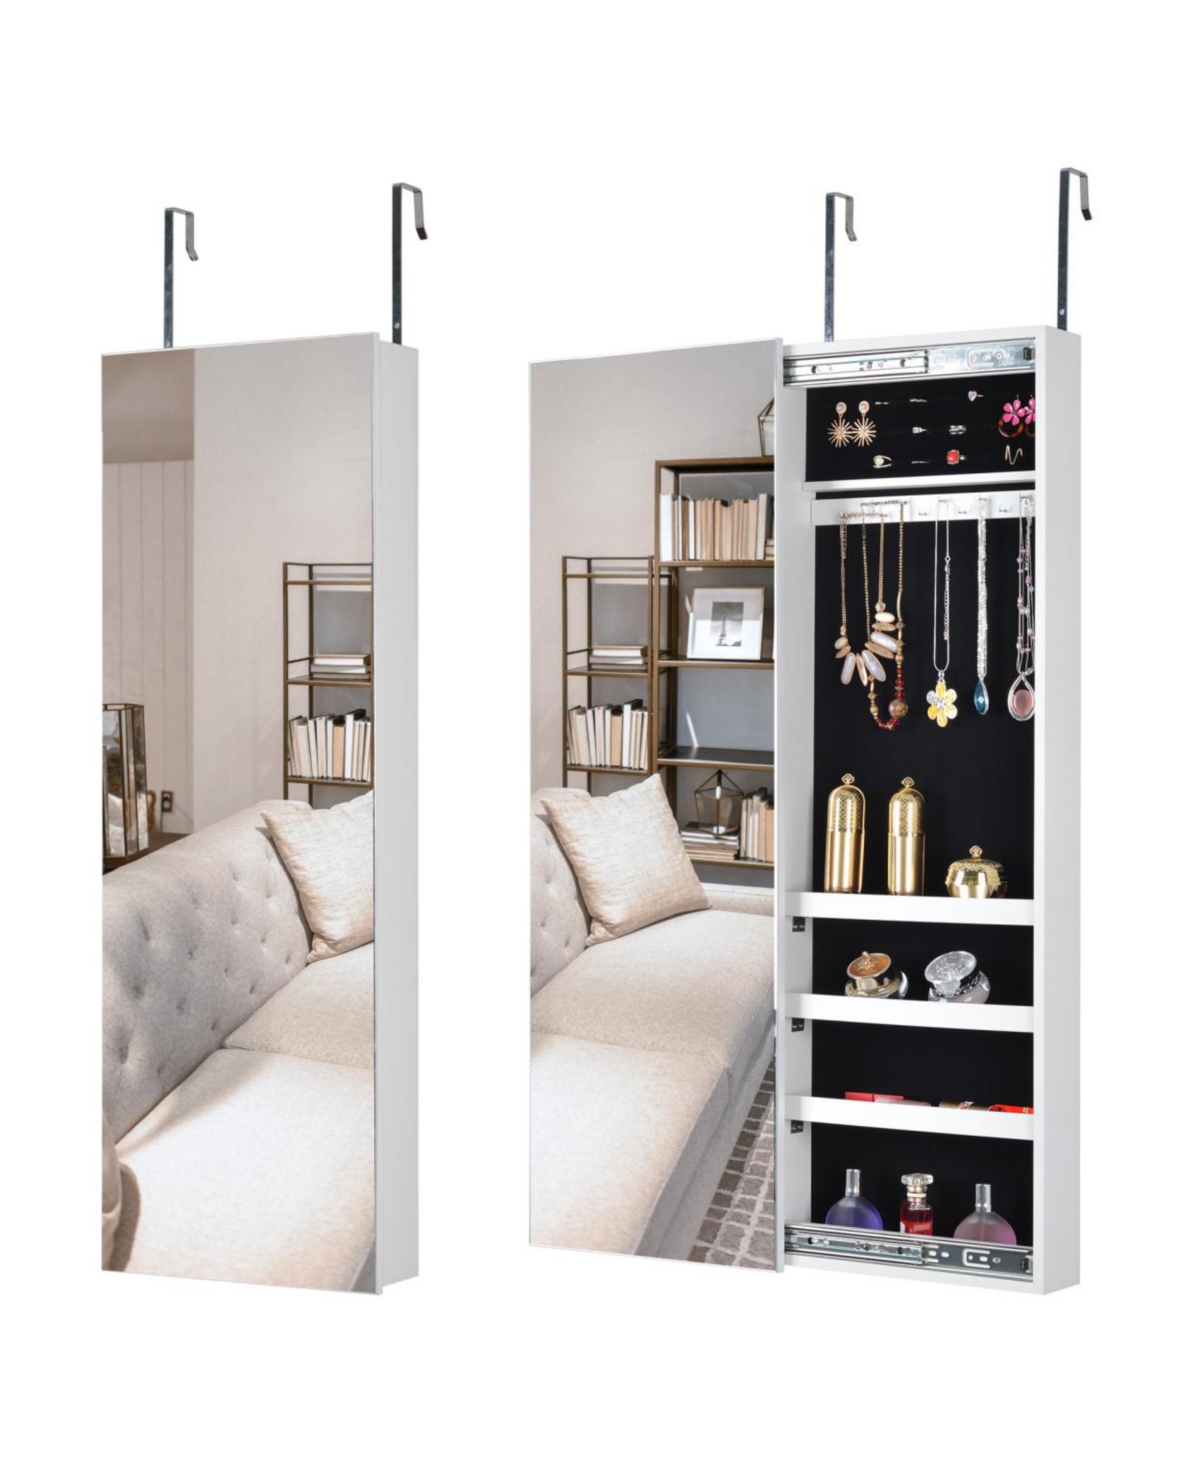 Full Mirror Jewelry Storage Cabinet with Slide Rail Can Be Hung On The Door Or Wall - White